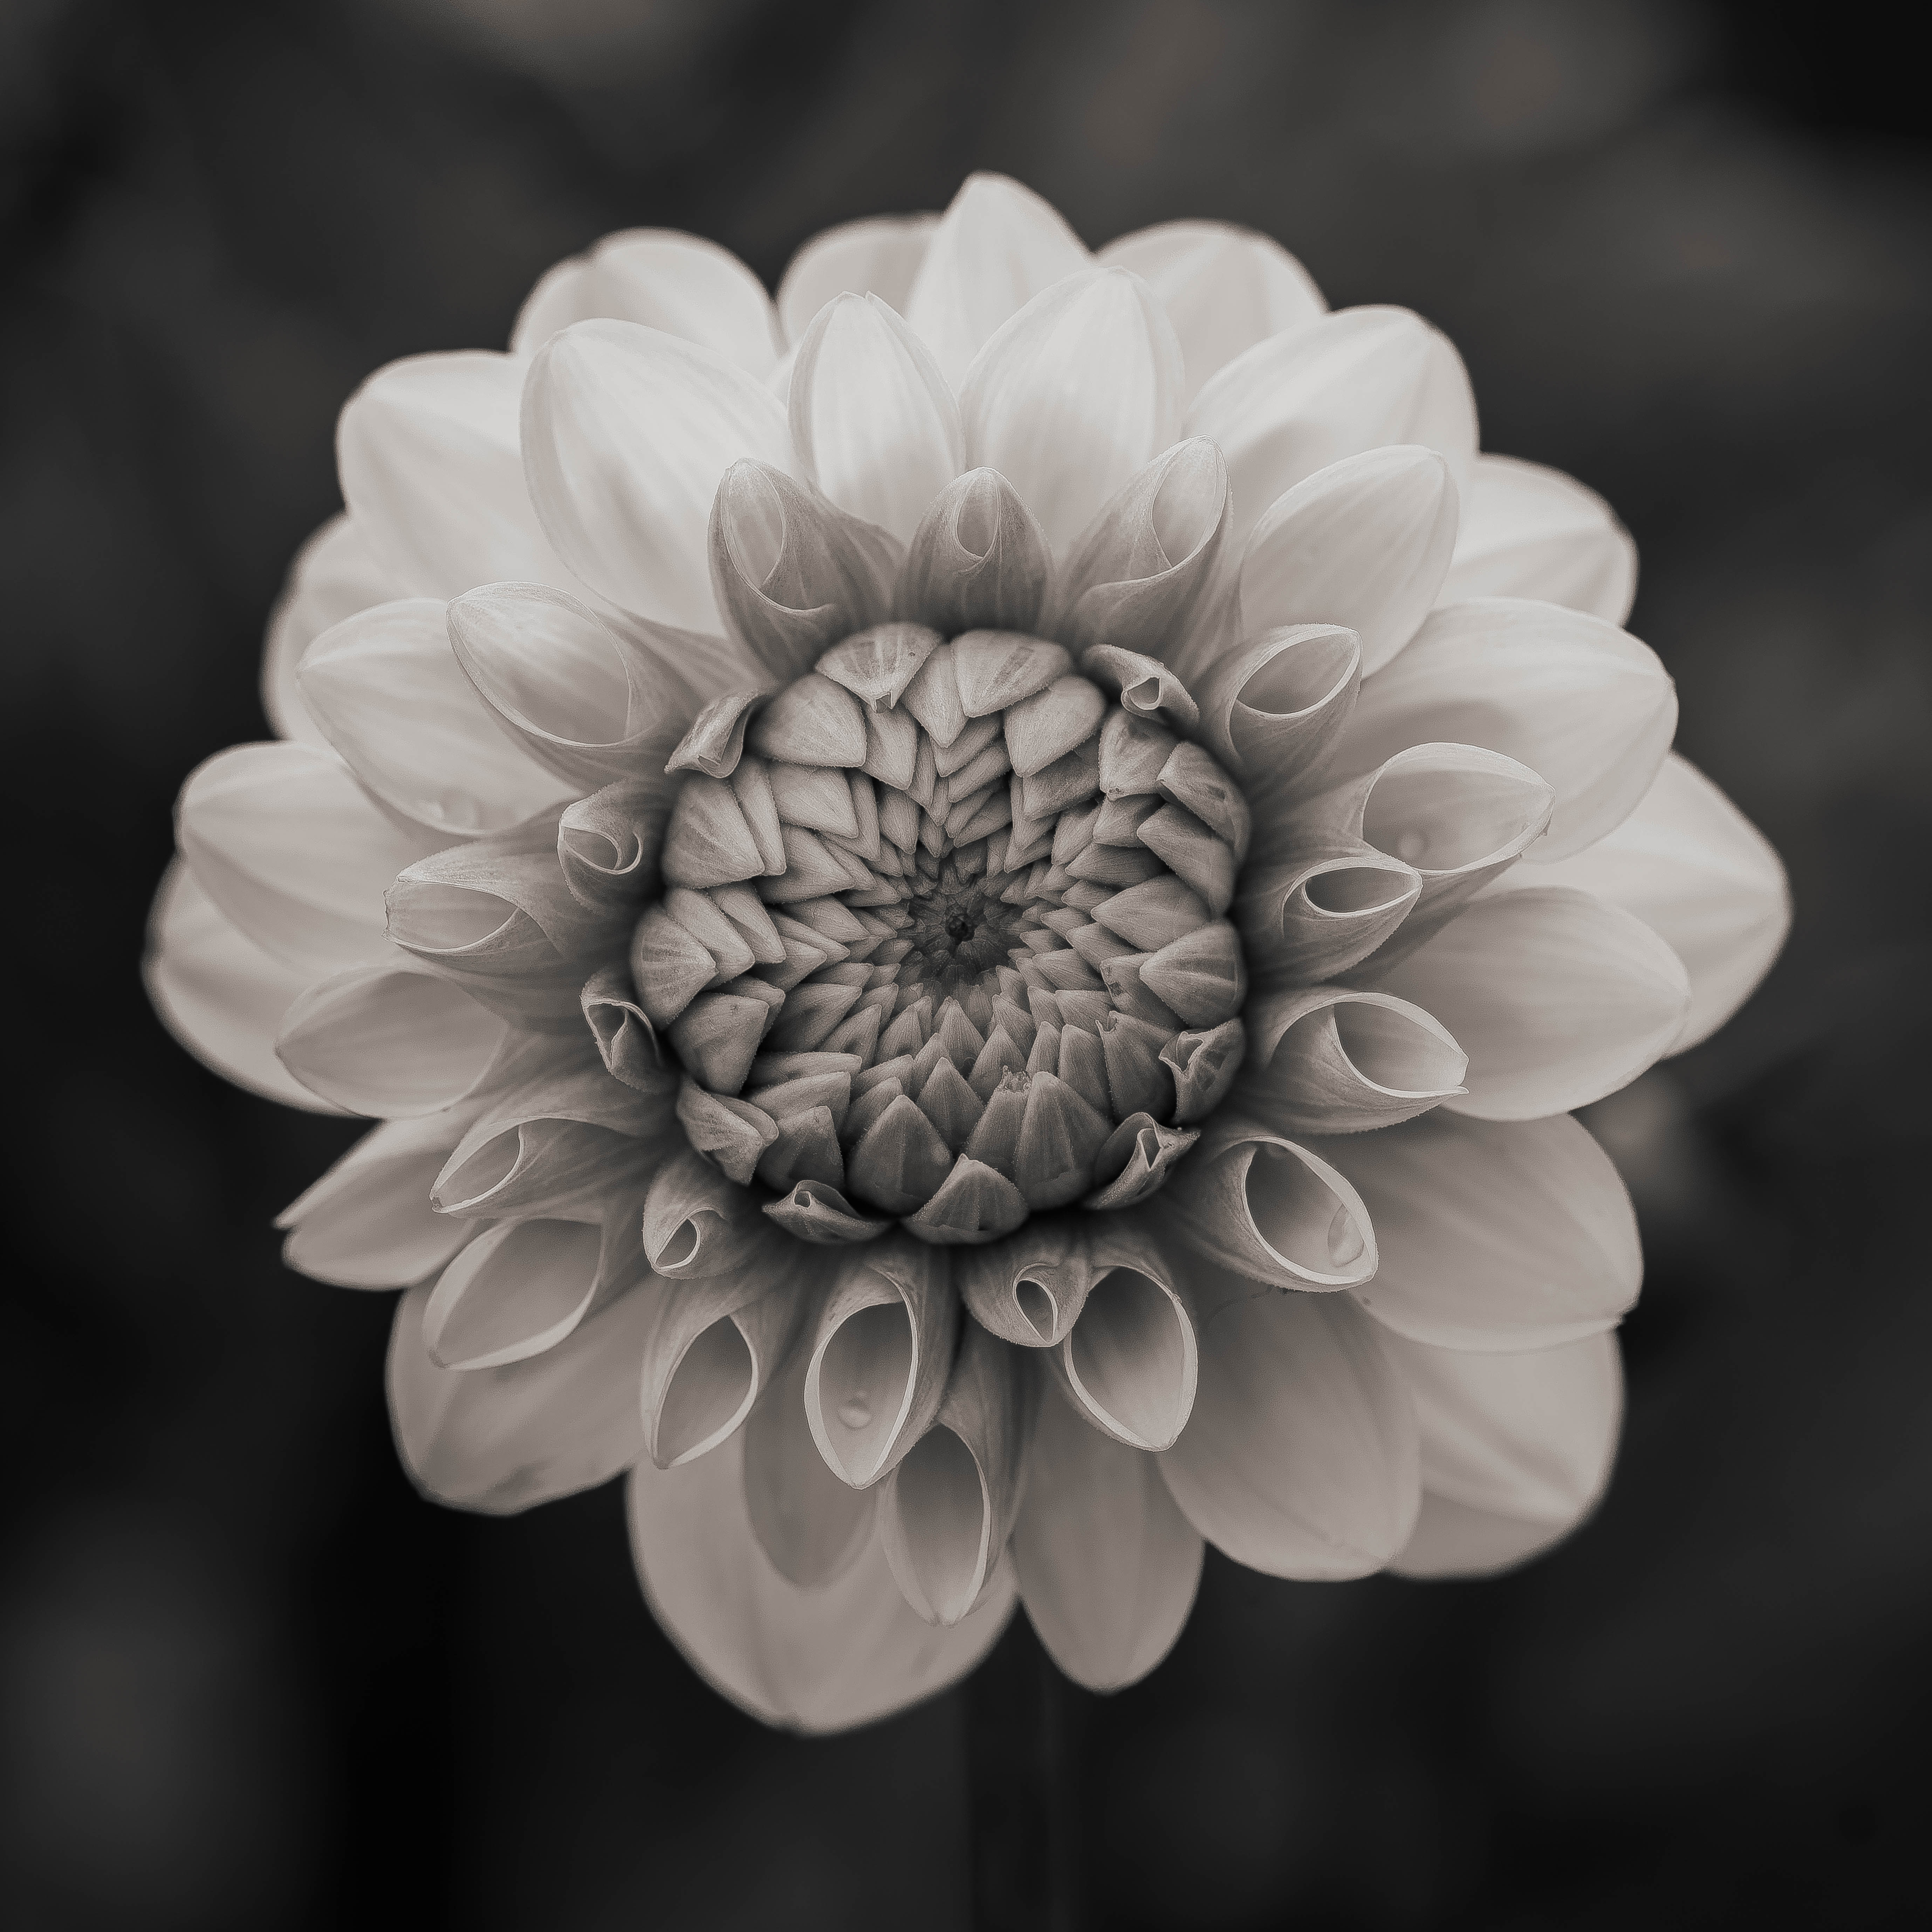 square photograph of close-up of flower blossoming in black and white, with blurred background